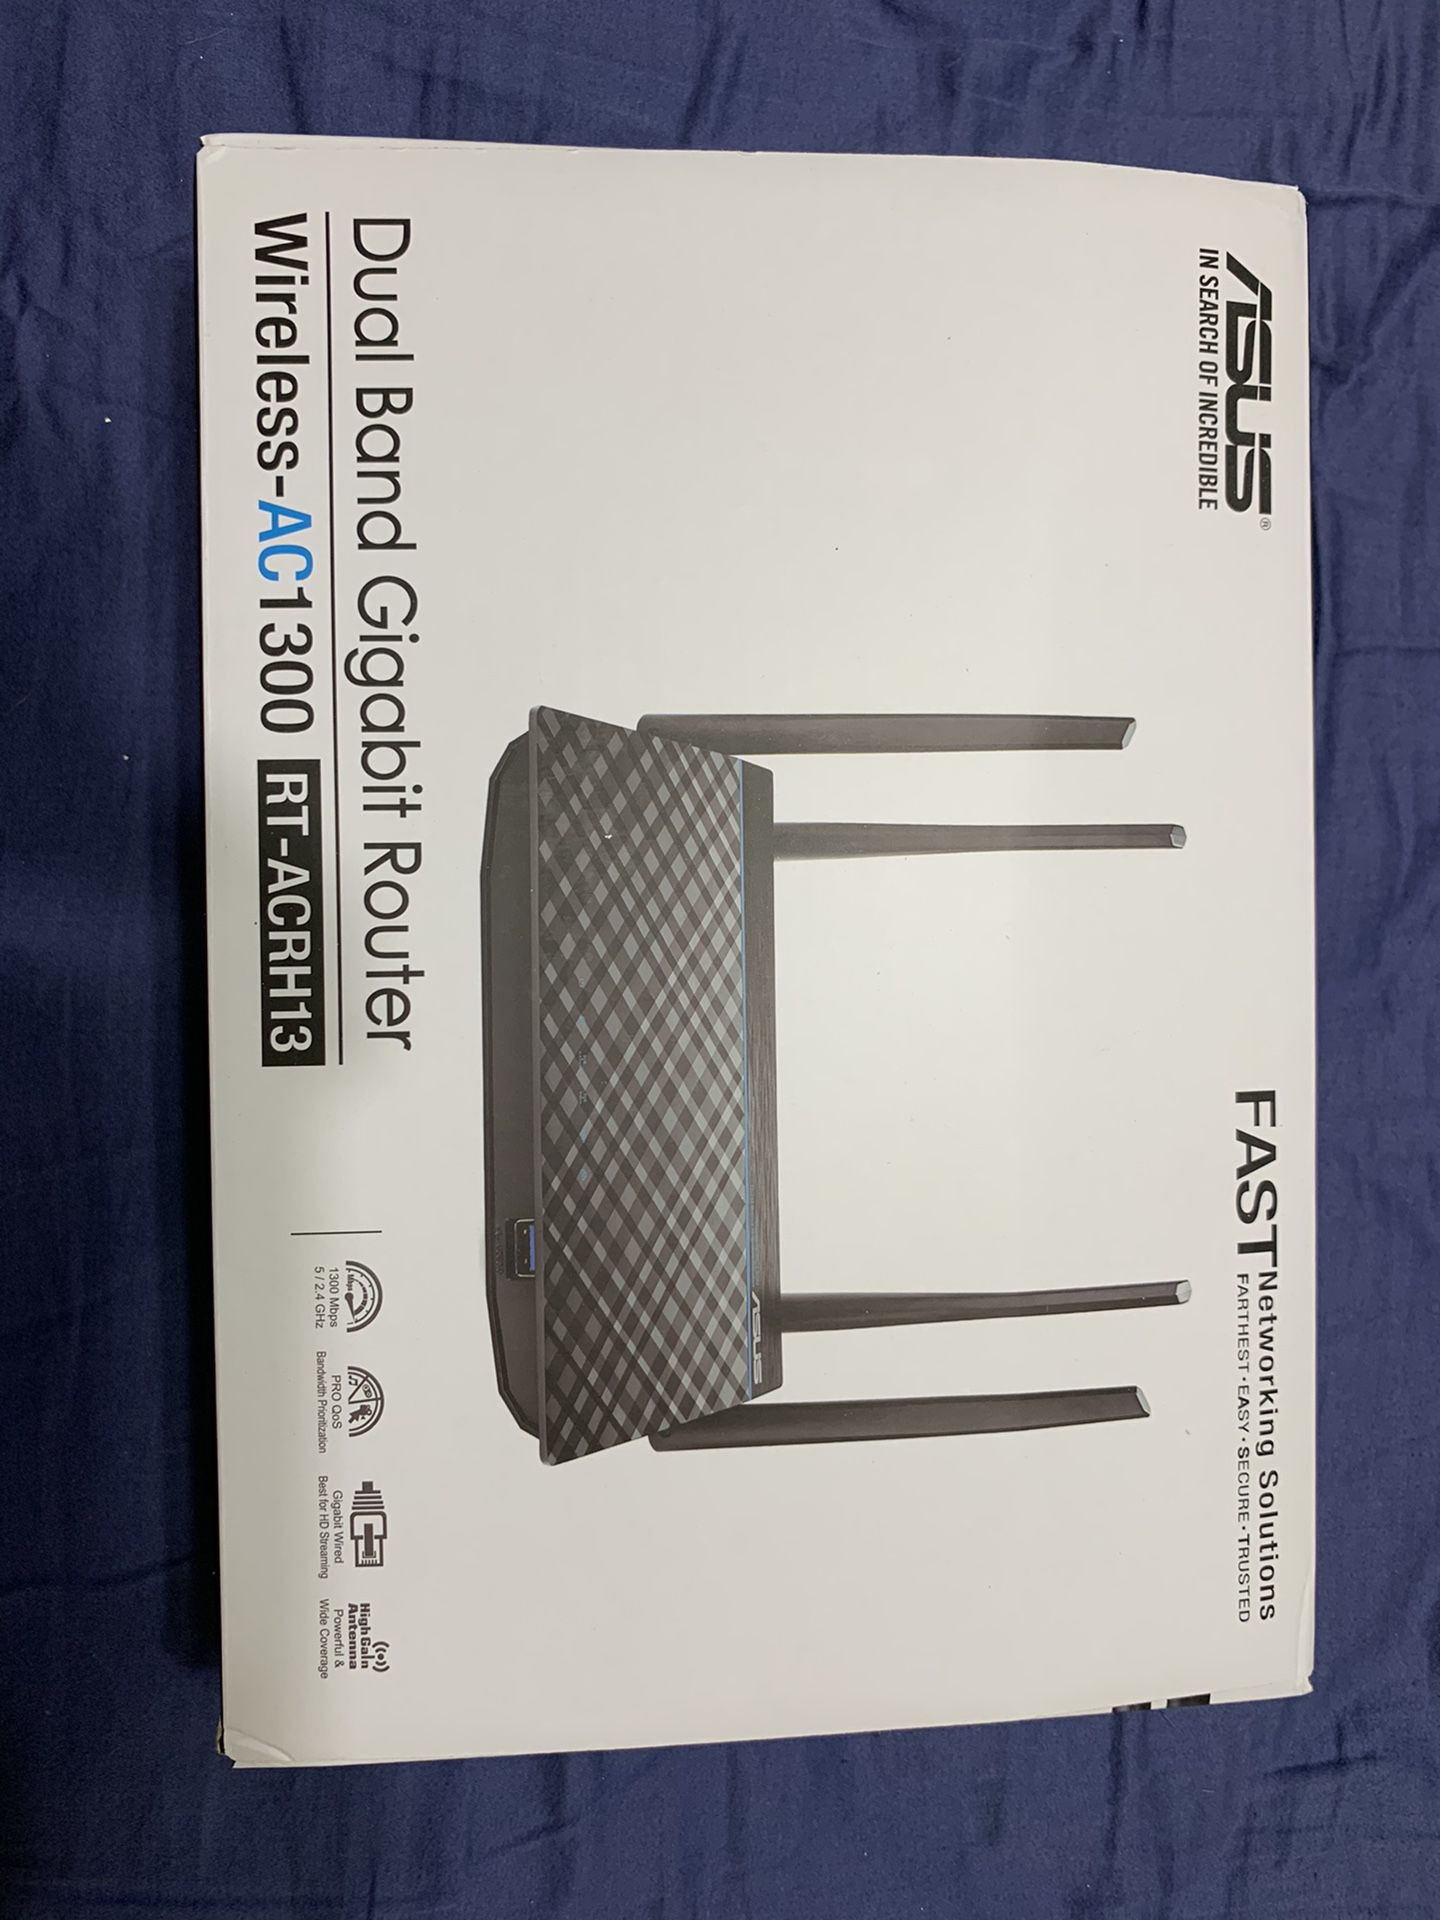 ASUS - AC1300 Dual Band Router